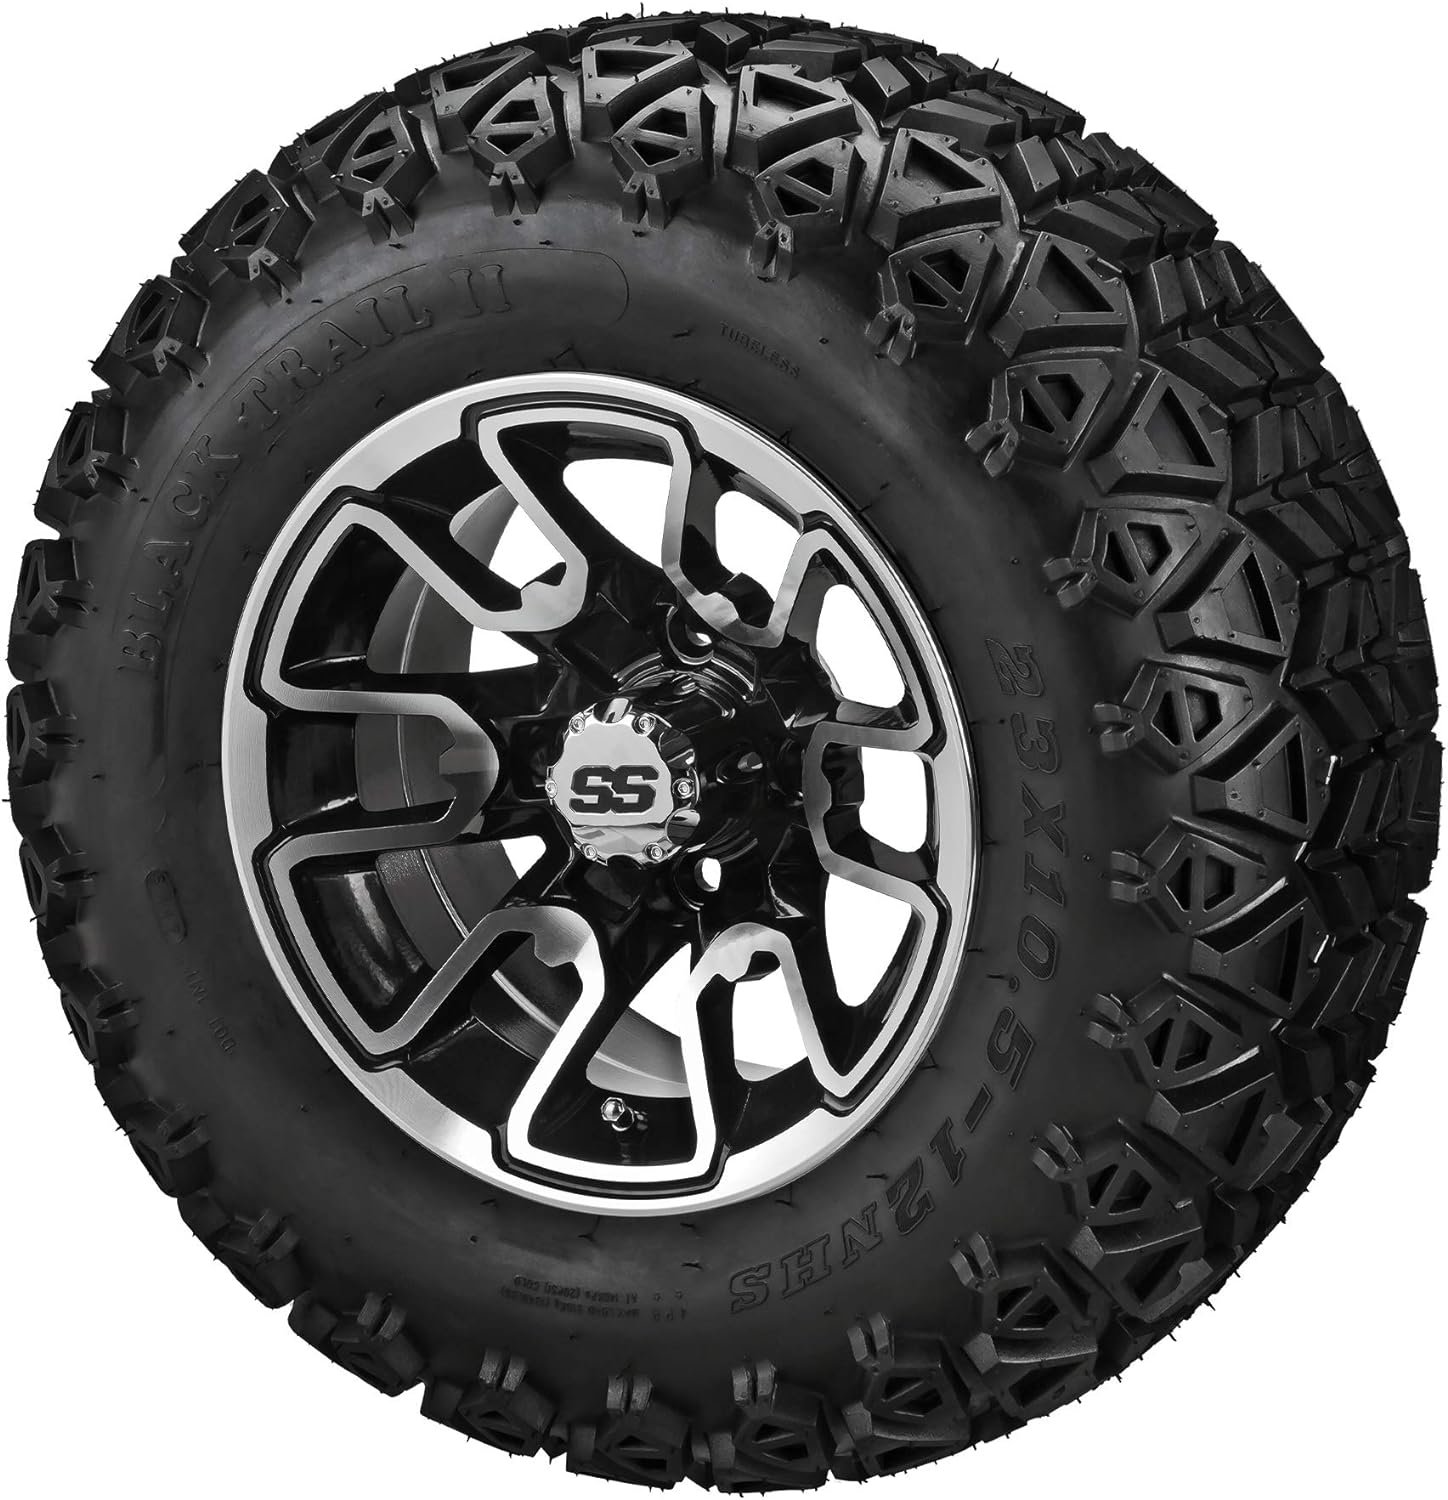 RM Cart - 12 Tombstone Black/Machined on 23x10.50-12 Black Trail II Tires (Set of 4), Fits Club Car  EZGo carts, Golf Cart Tires and Wheels Combo, Can be Used on Lawn Mowers and ATVs